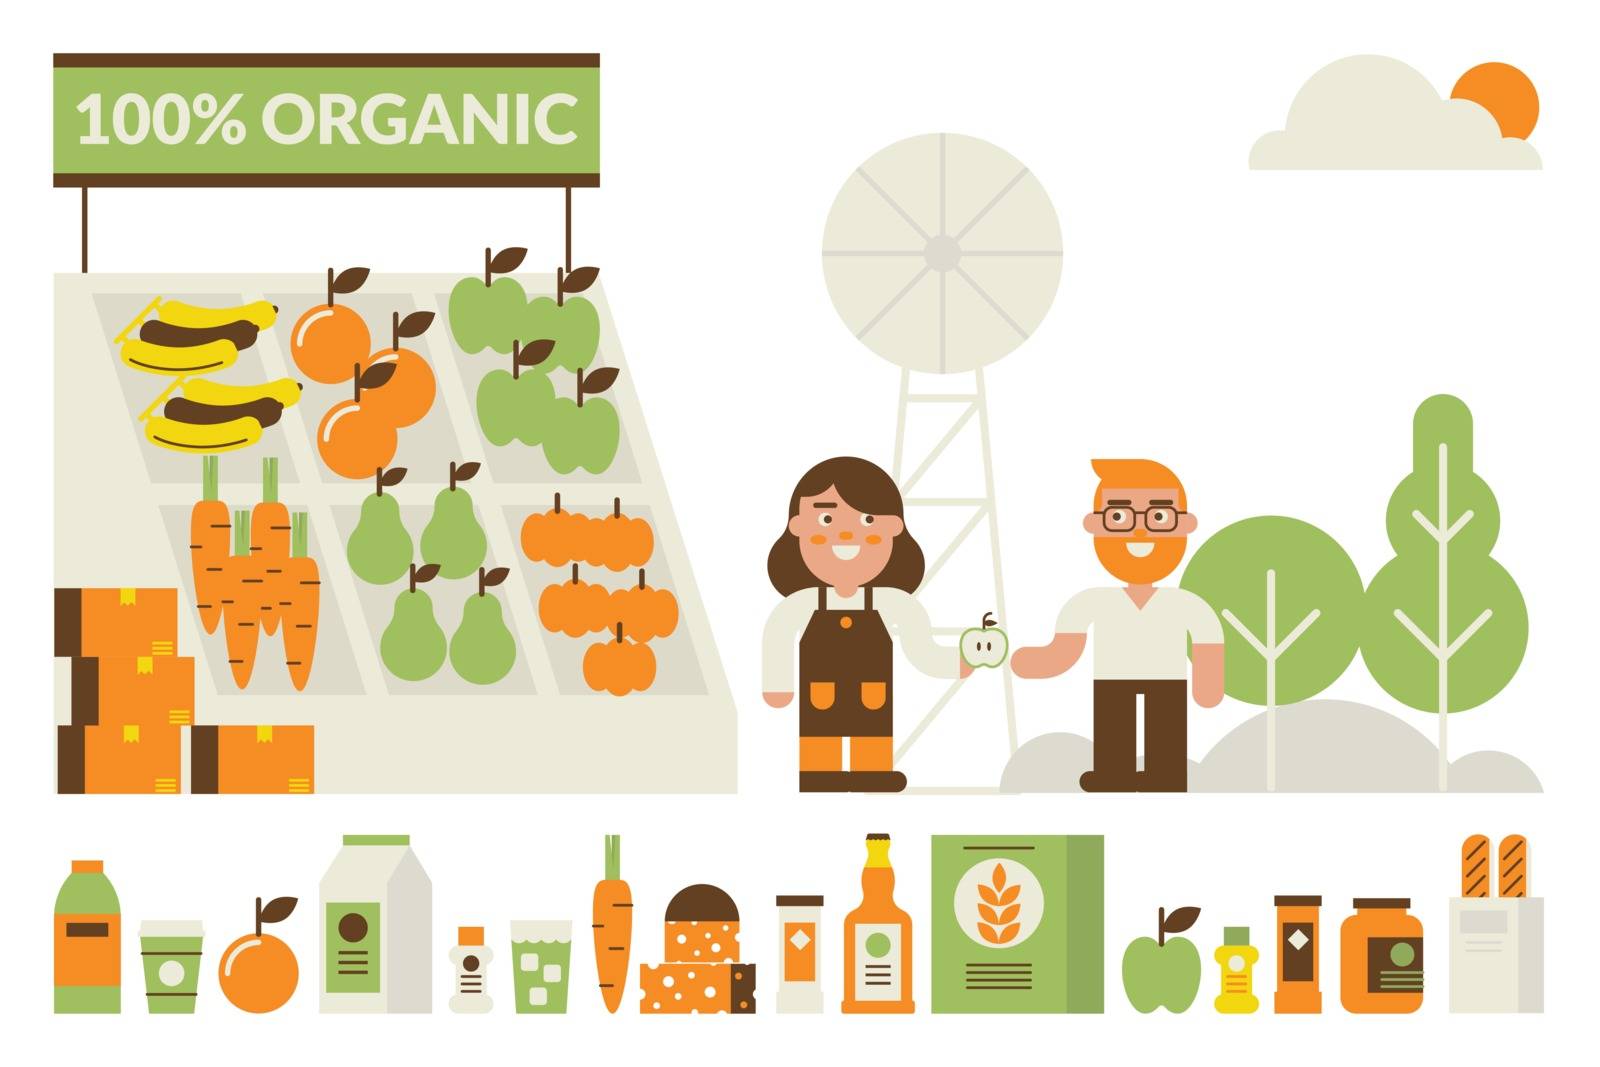 Organic flea market concept illustration with product icons